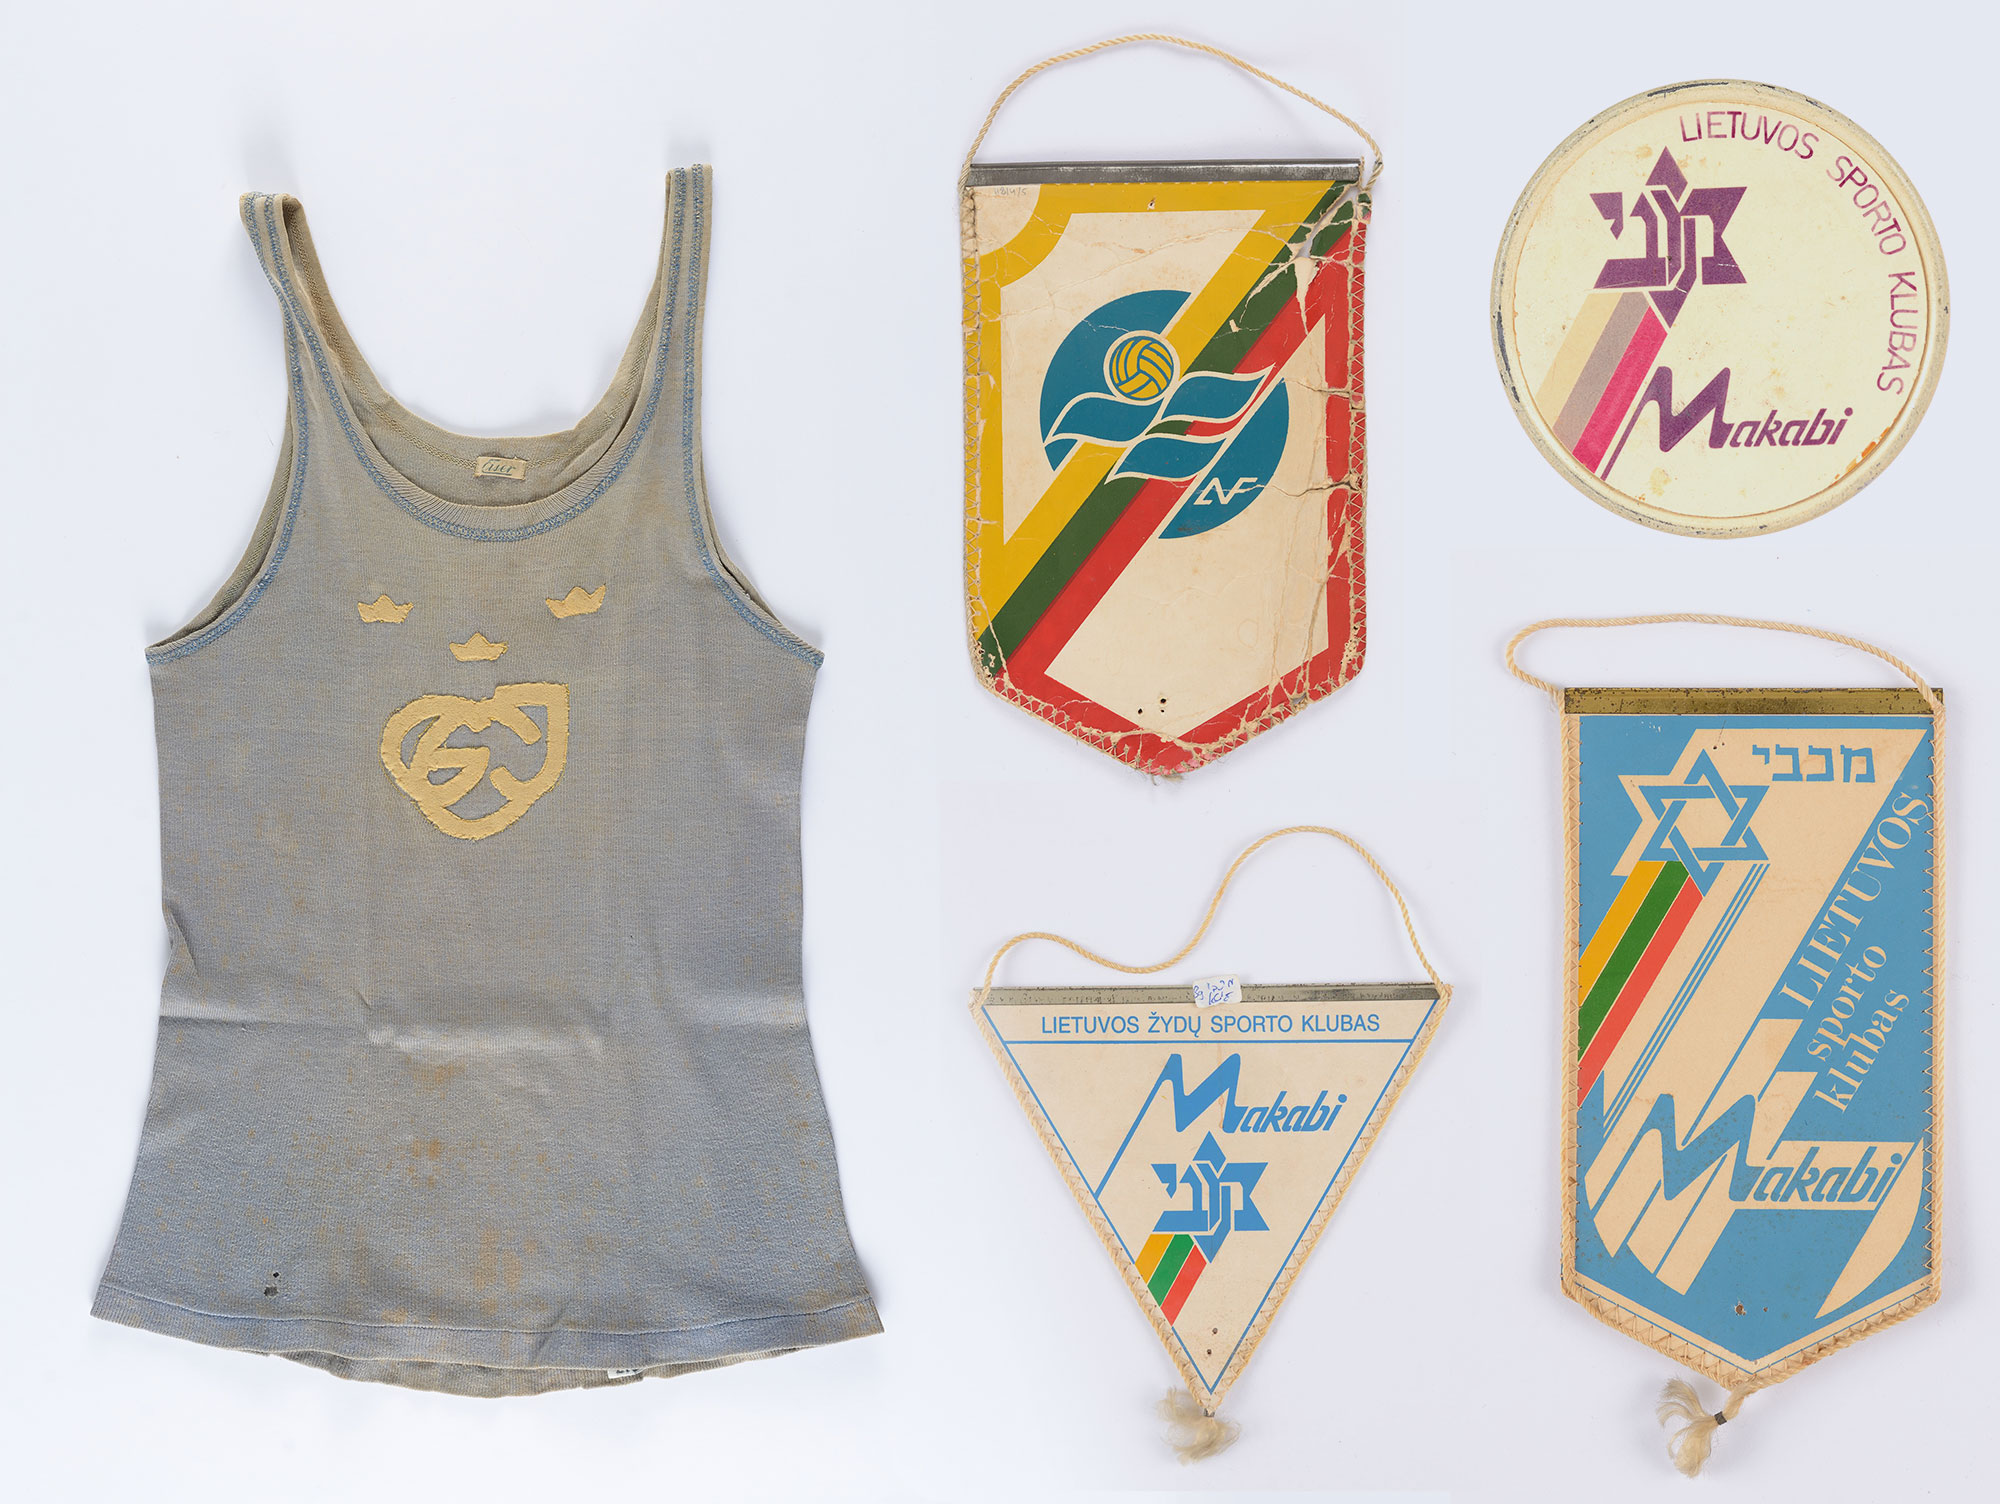 Football shirt and souvenirs of the Maccabi Kovno sports club that Shmuel Burstein, a player in Maccabi Kovno’s football team, brought to Eretz Israel with him in the 1930s